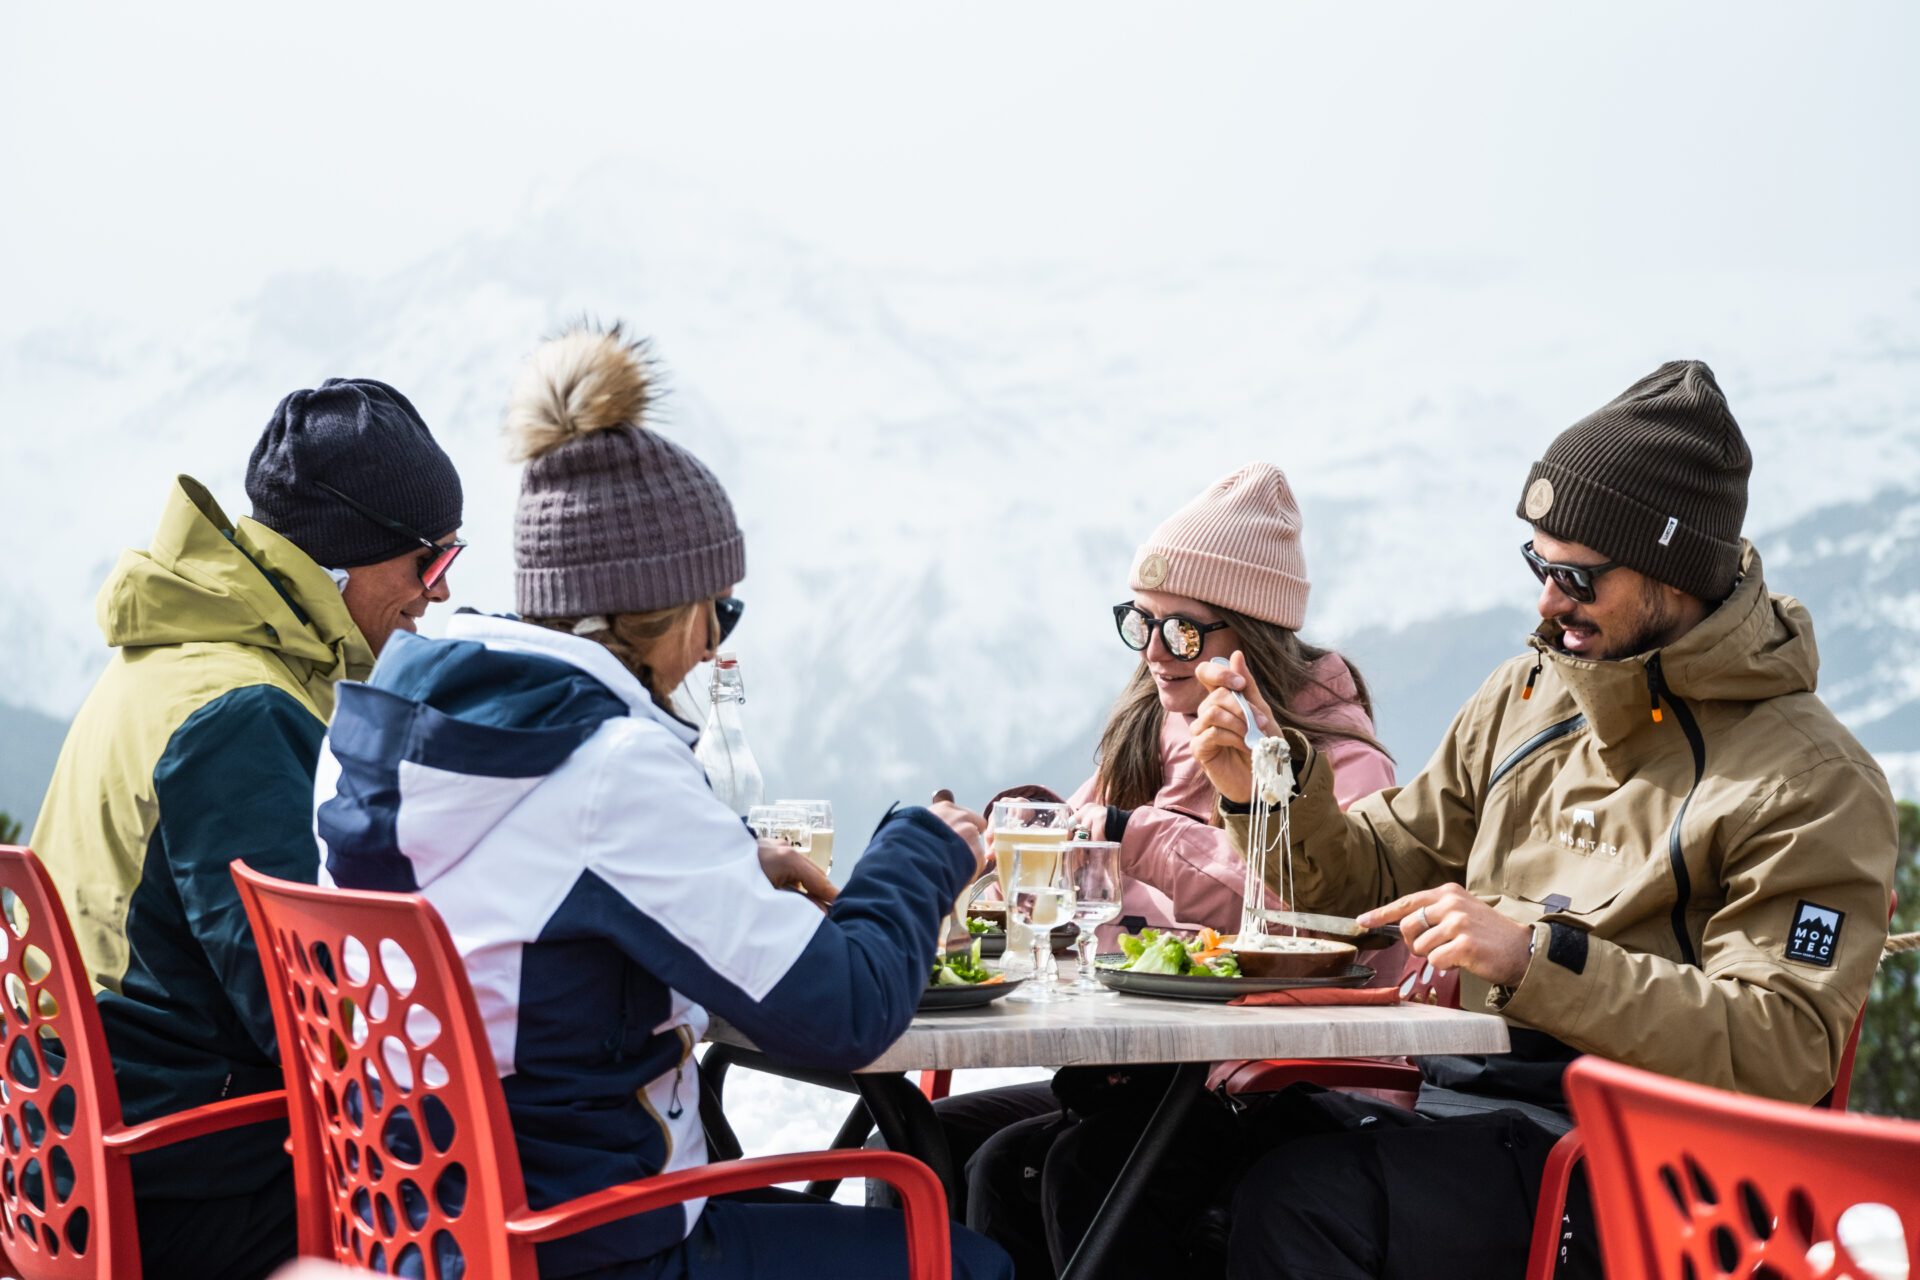 An image of a group enjoying one of the mountain restaurants